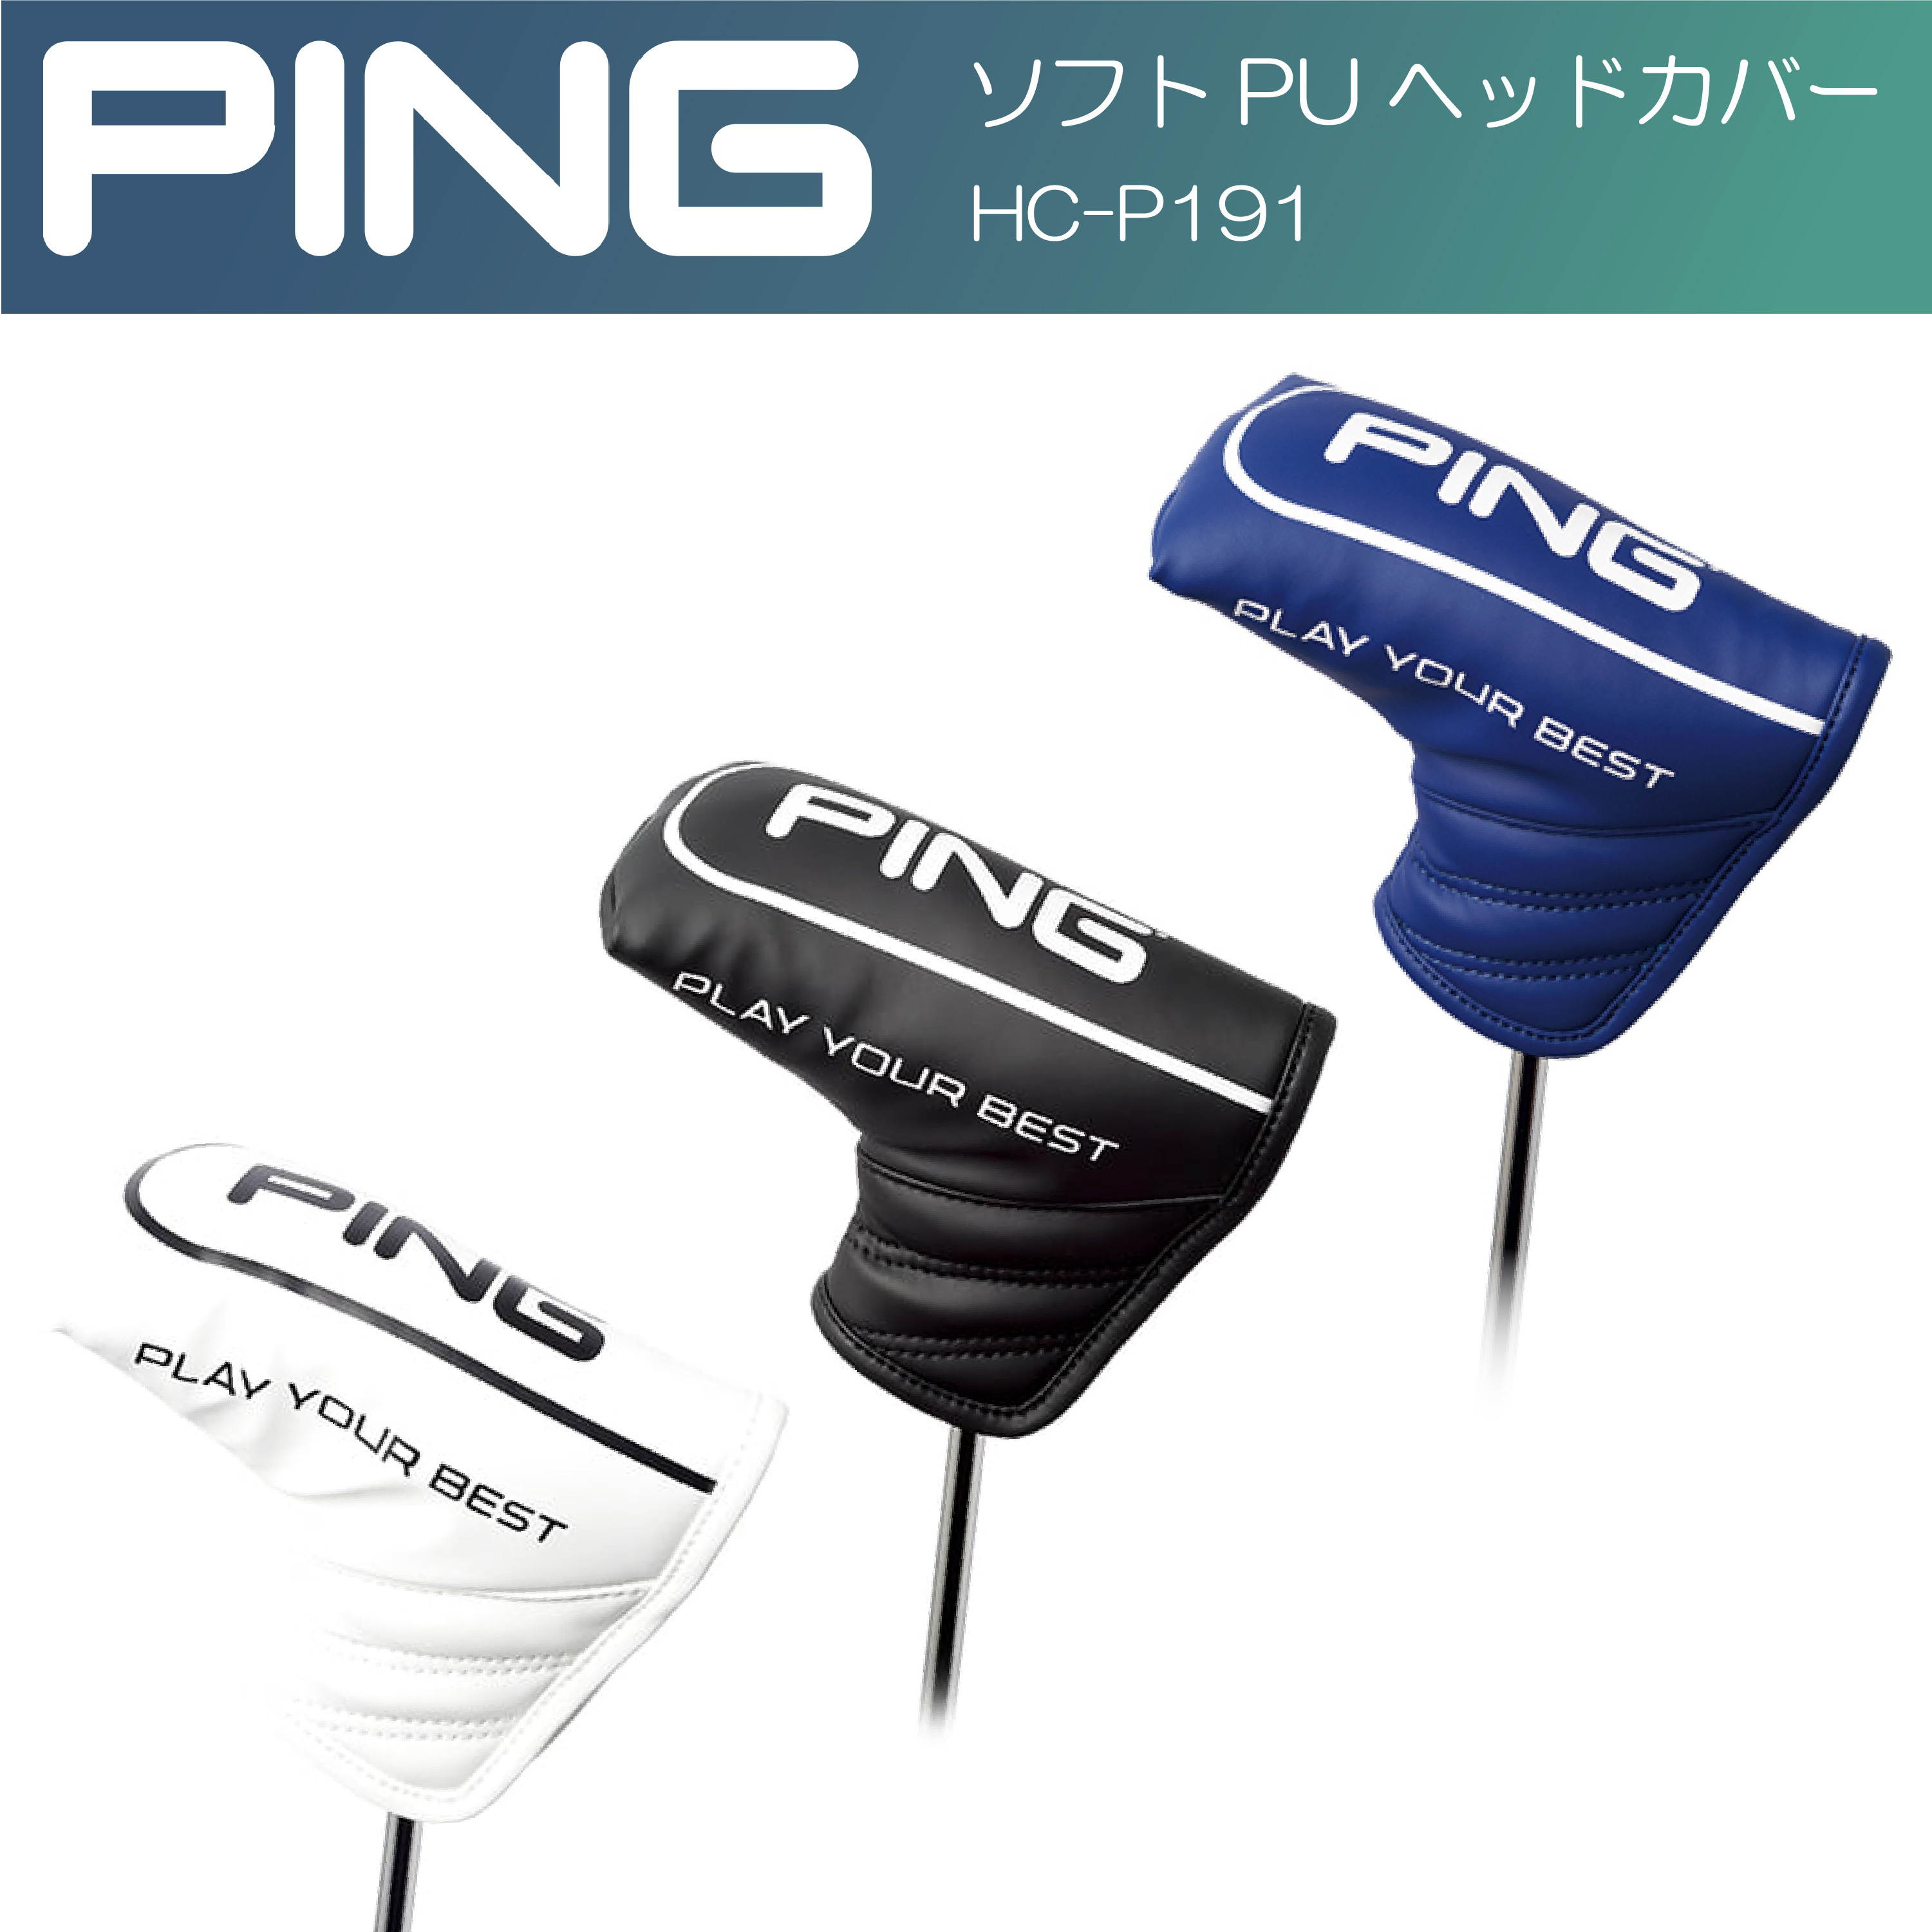 PING SOFT PU BLADE PUTTER COVER HC-P191